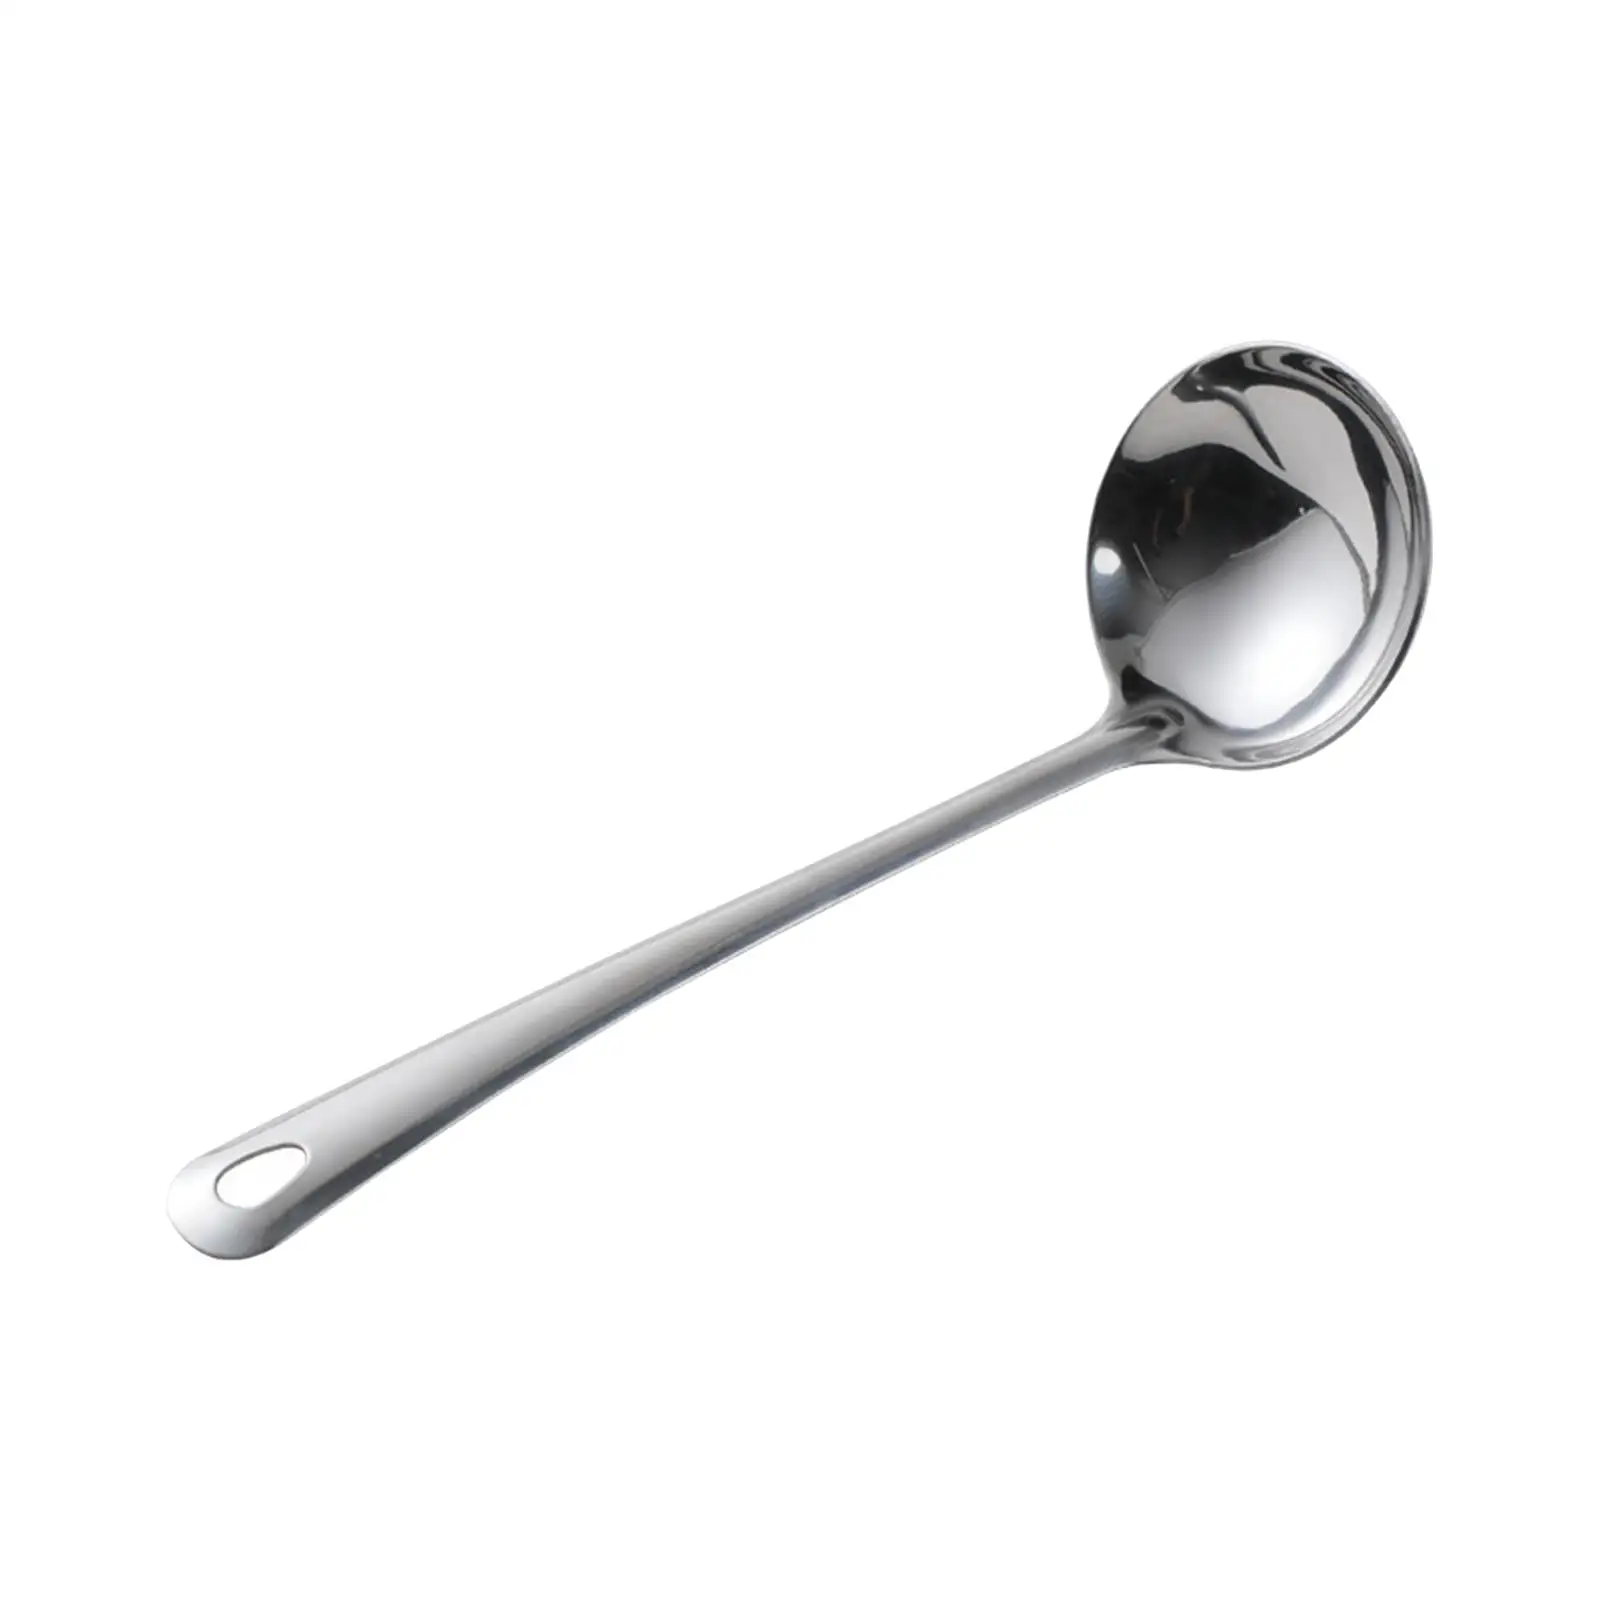 Soup Ladle Spoon Stainless Steel Comfortable Grip Cooking Ladle for Gravy Salad Dressing